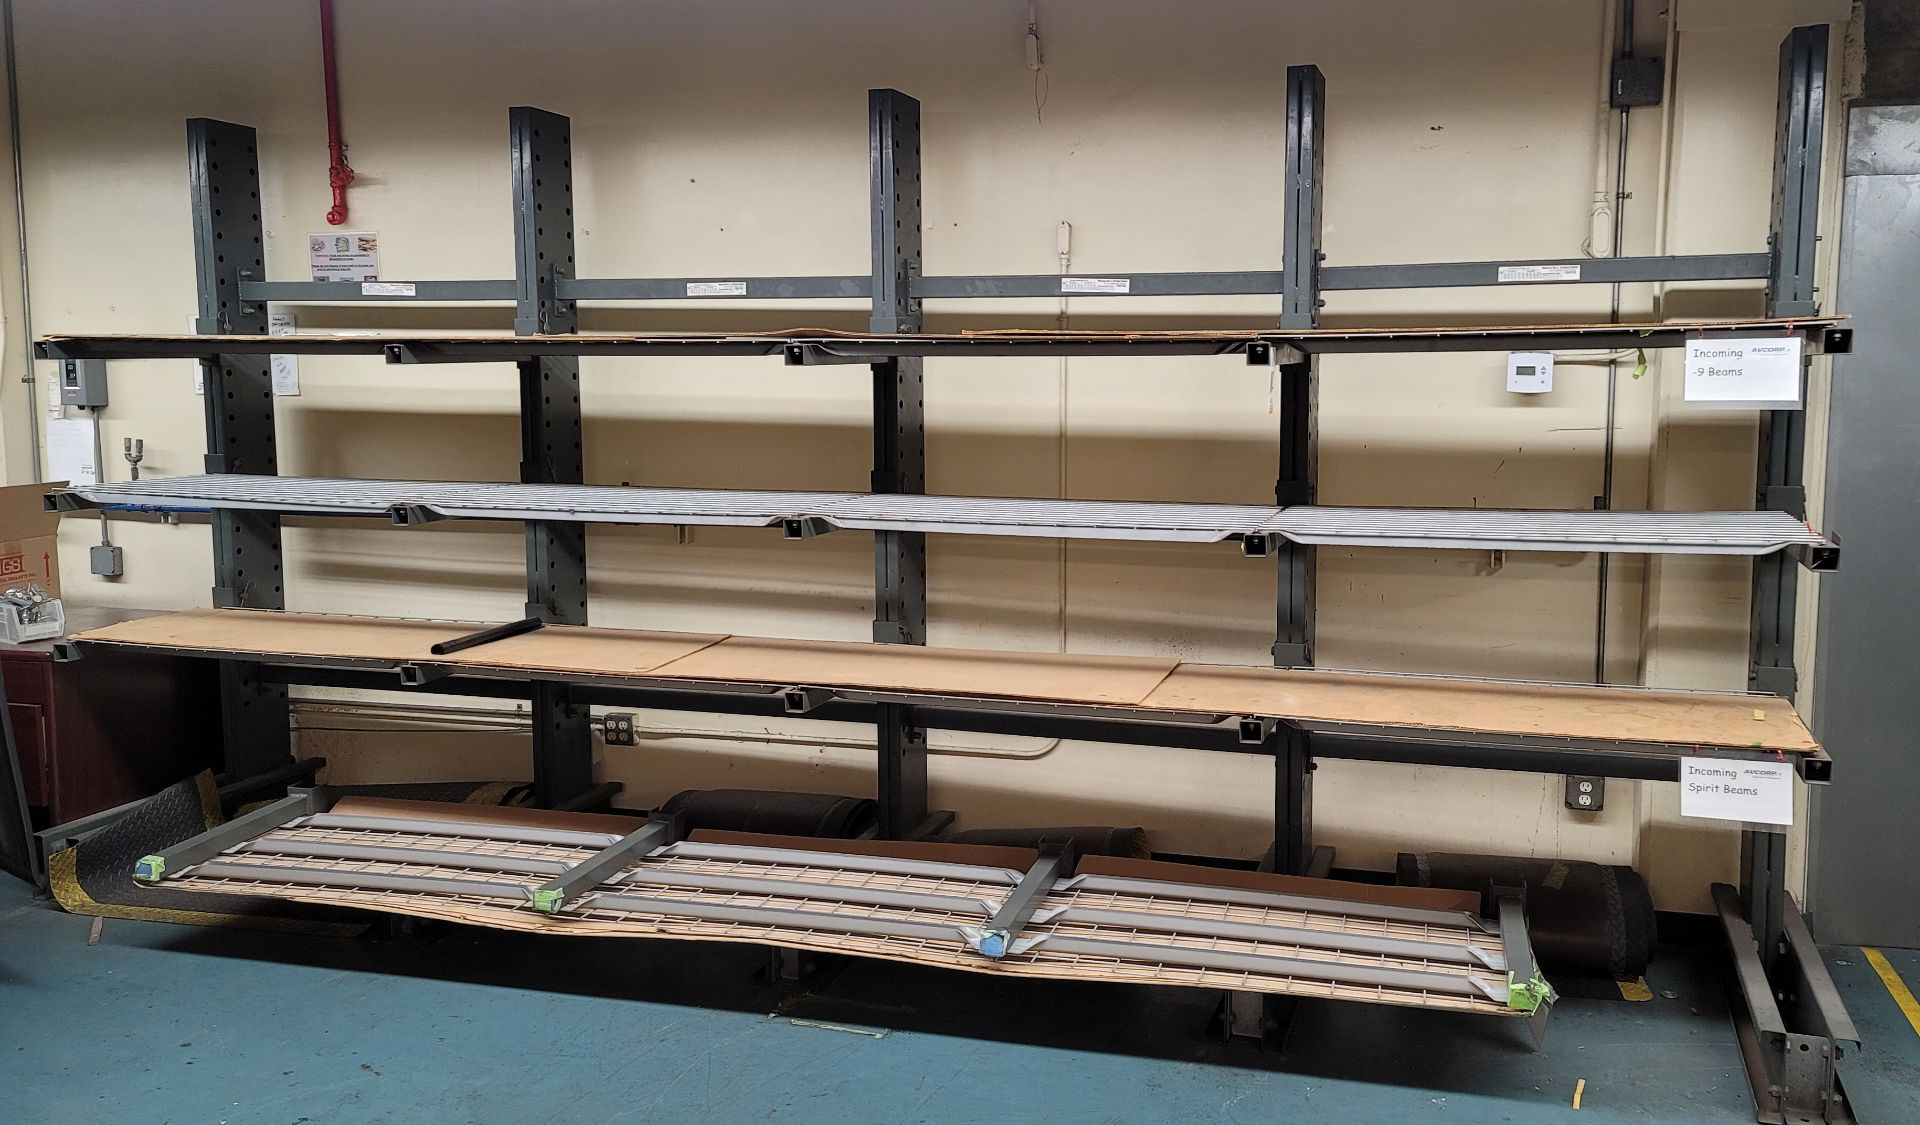 16' STEELTREE CANTILEVER MATERIAL RACK, 2' ARMS, 8' HT W/ WIRE DECKING (LOCATION: BUILDING 15 MAIN)